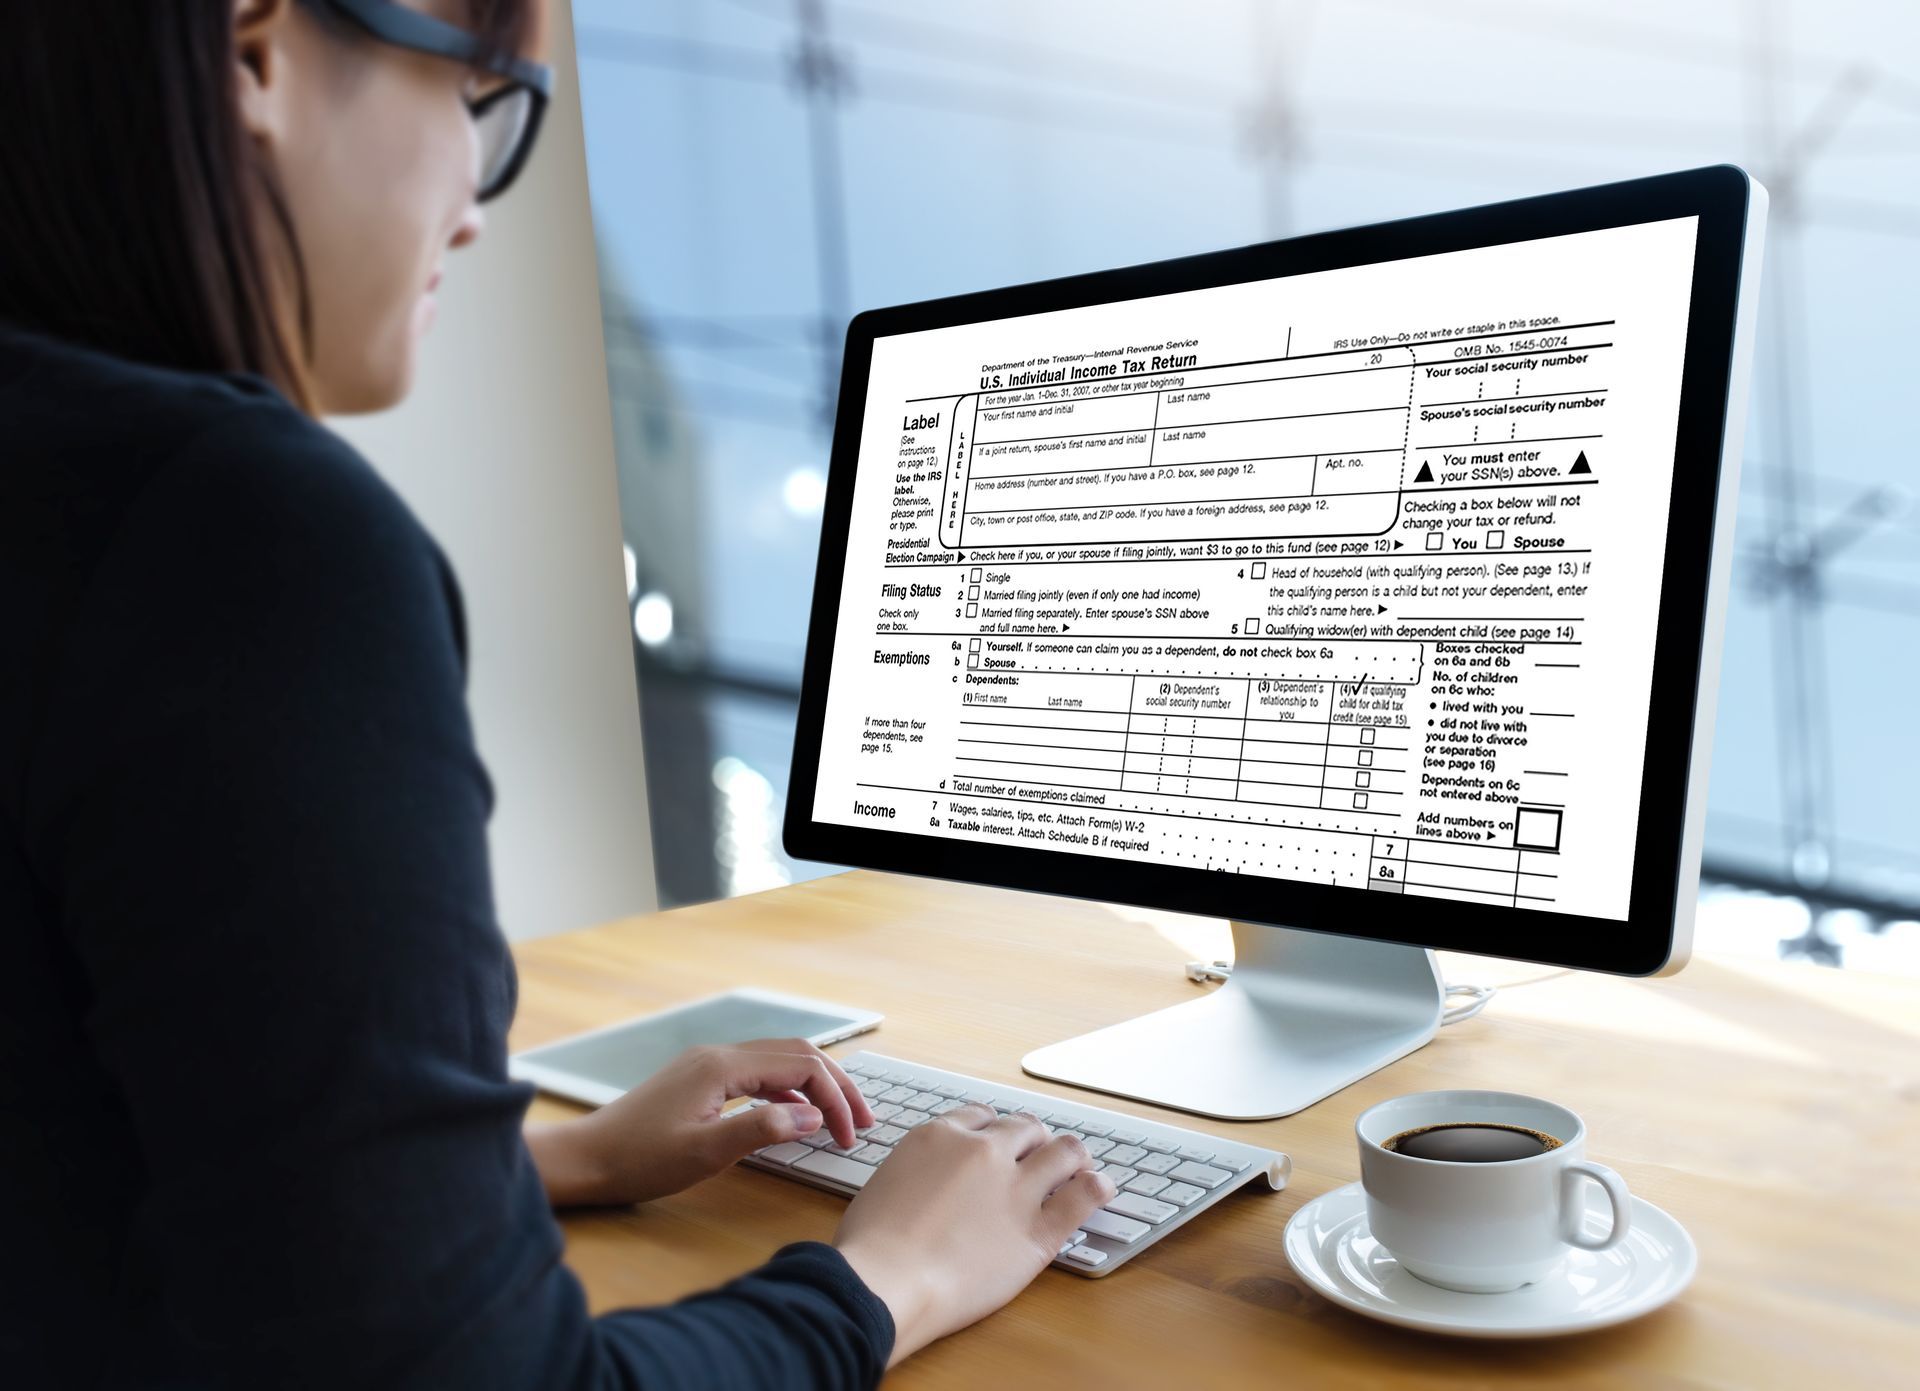 a woman is using a computer to fill out a u.s. individual income tax return